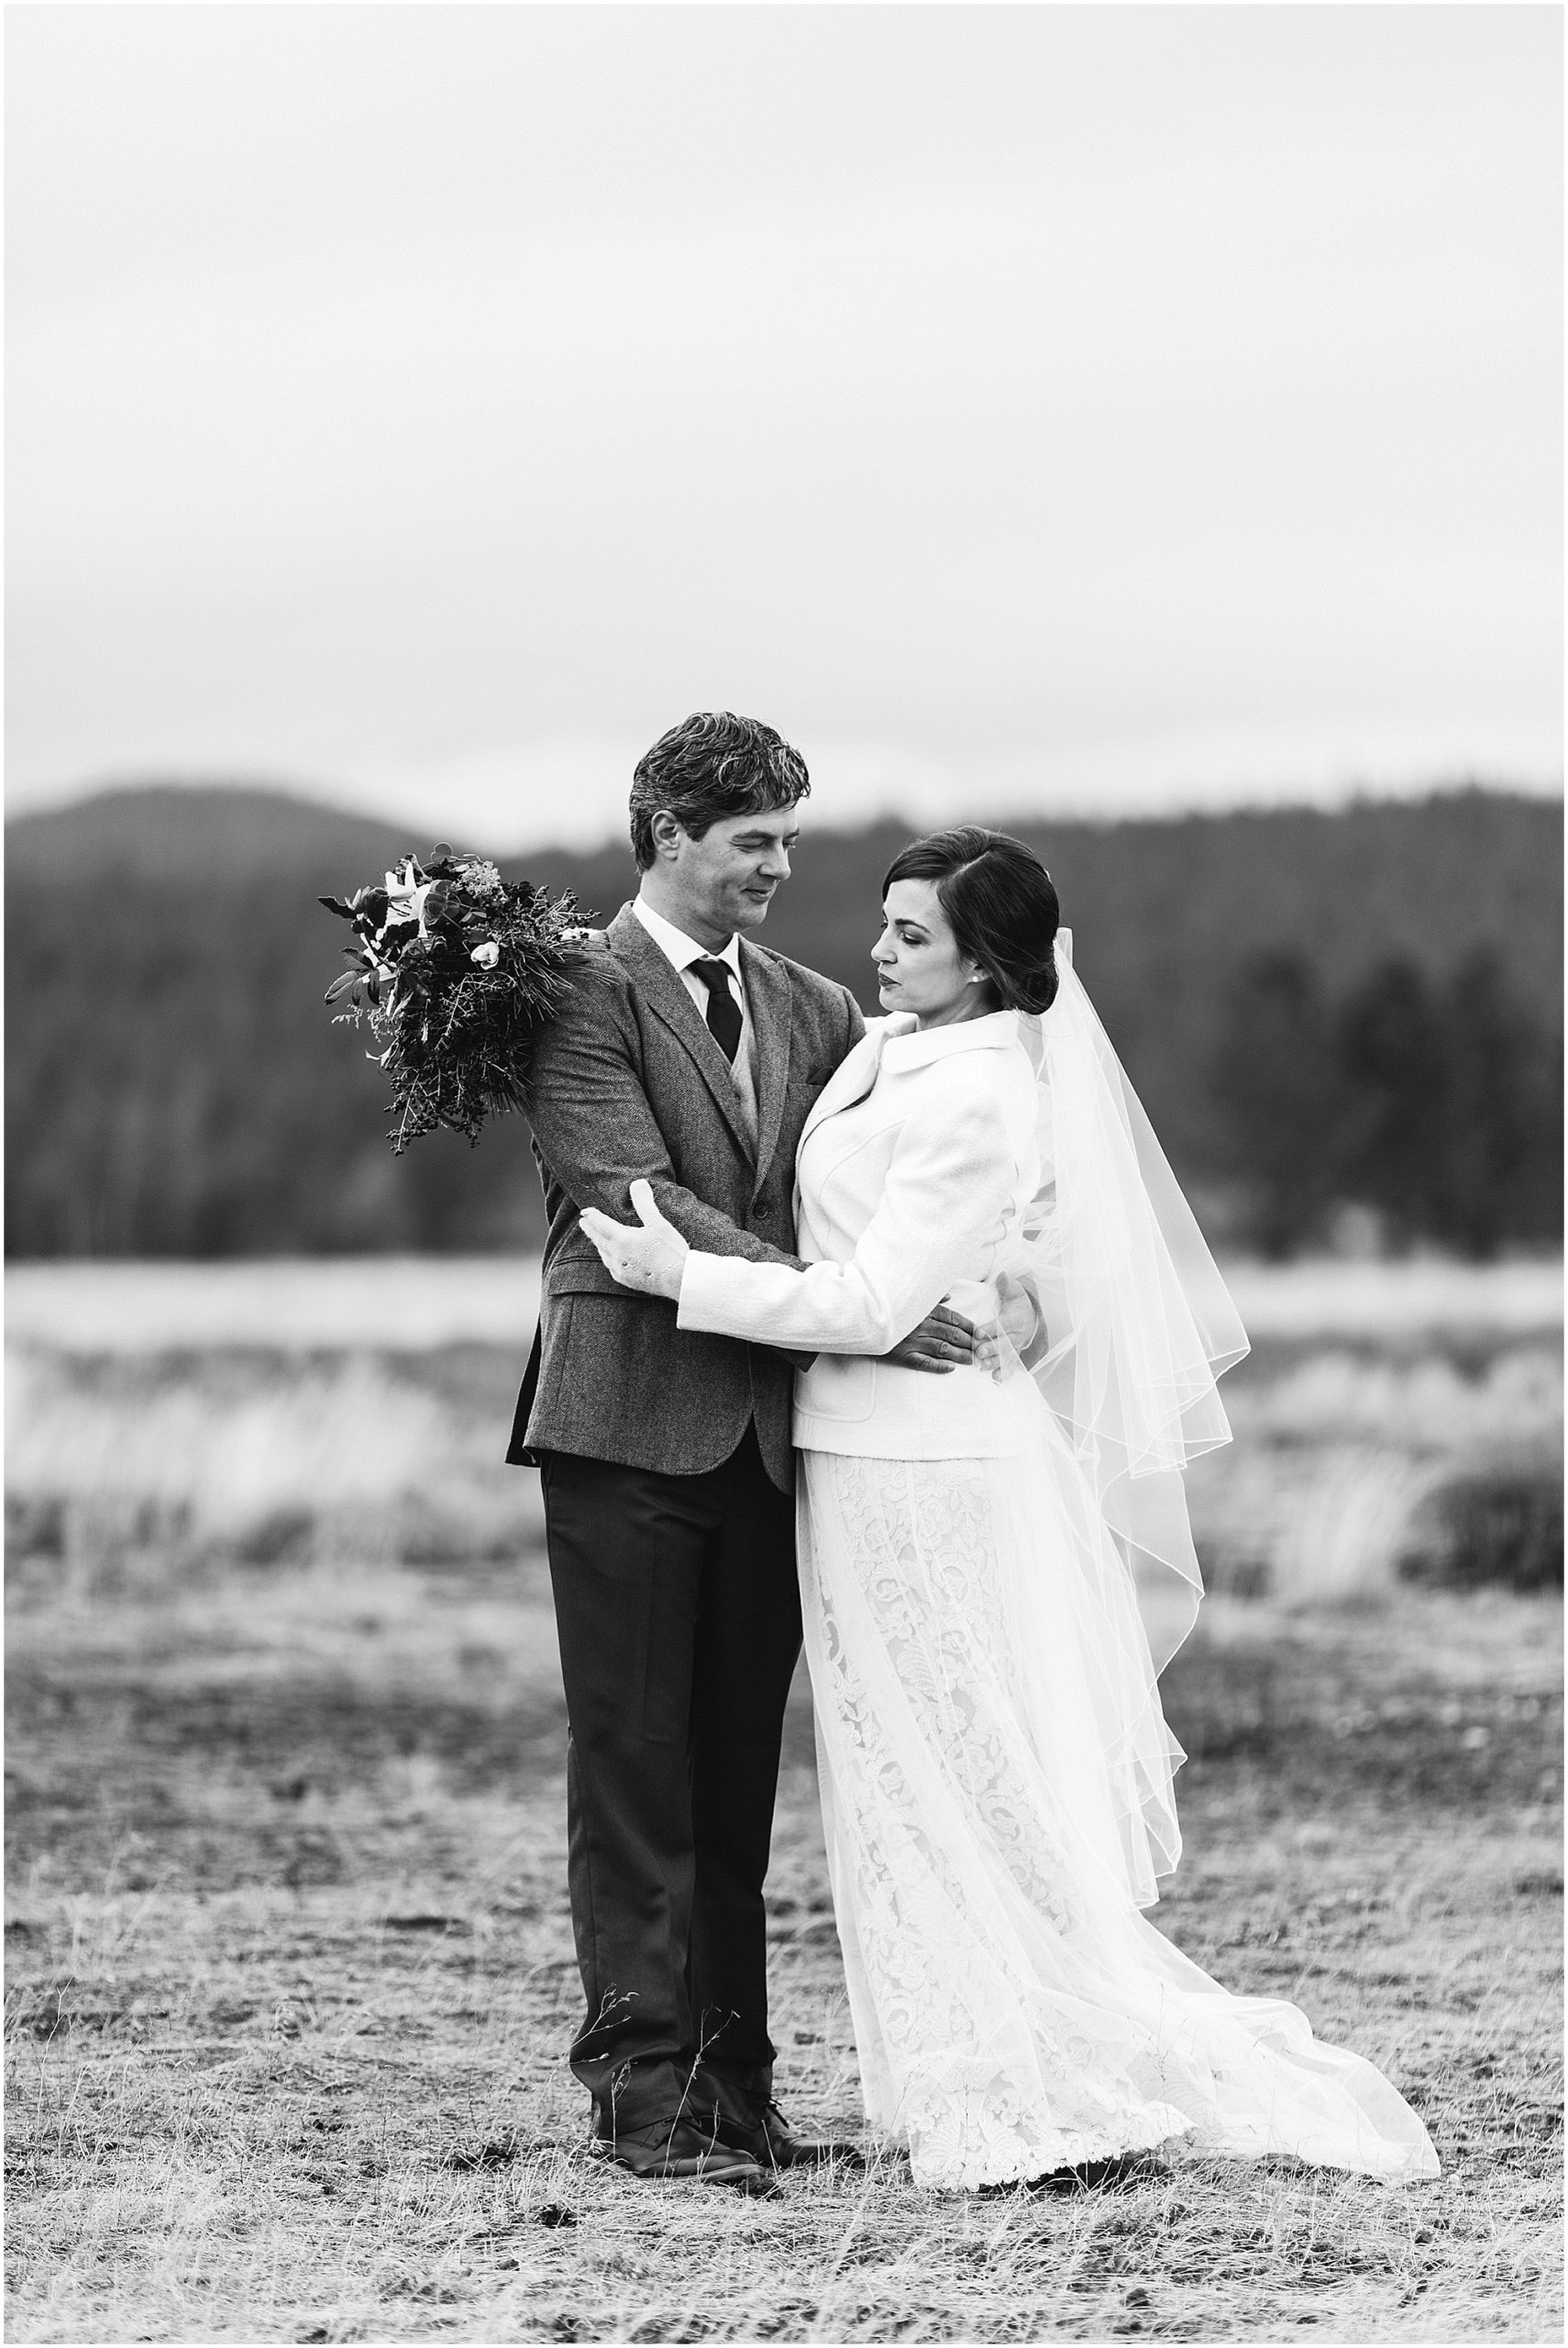 A gorgeous black and white photograph of a couple on their winter wedding day at Sunriver Resort in Oregon. Photographed by Bend Oregon wedding photographer Erica Swantek Photography